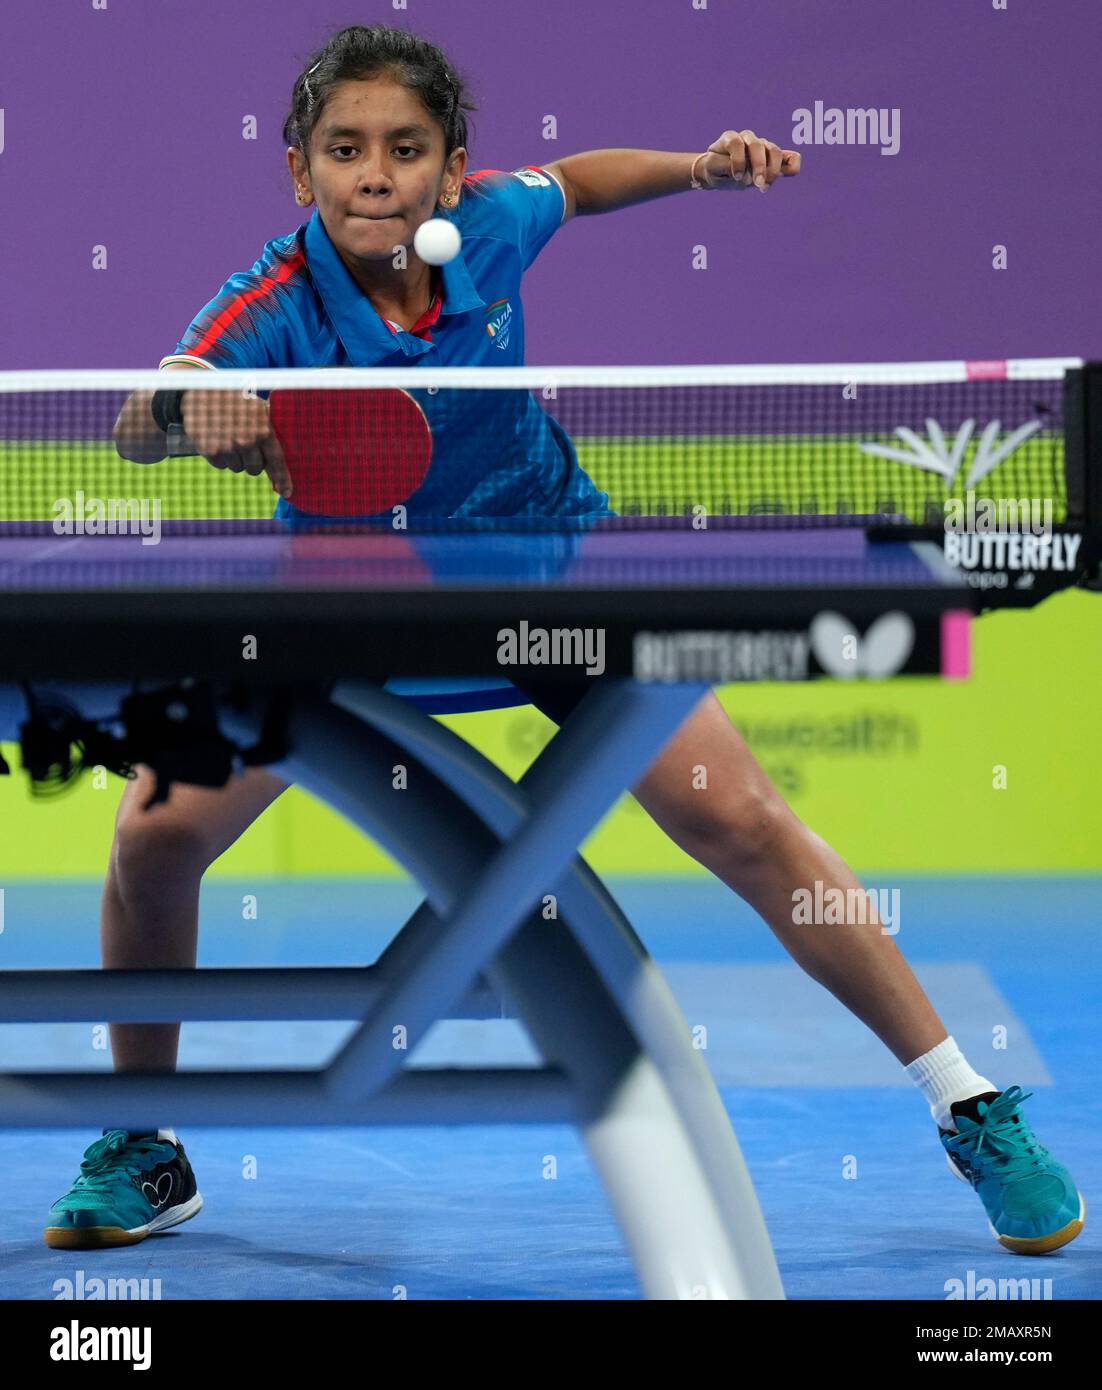 Indias Sreeja Akula competes during the womens bronze medal table tennis match against Australias Yangzi Liu at the Commonwealth Games in Birmingham, England, Sunday, Aug